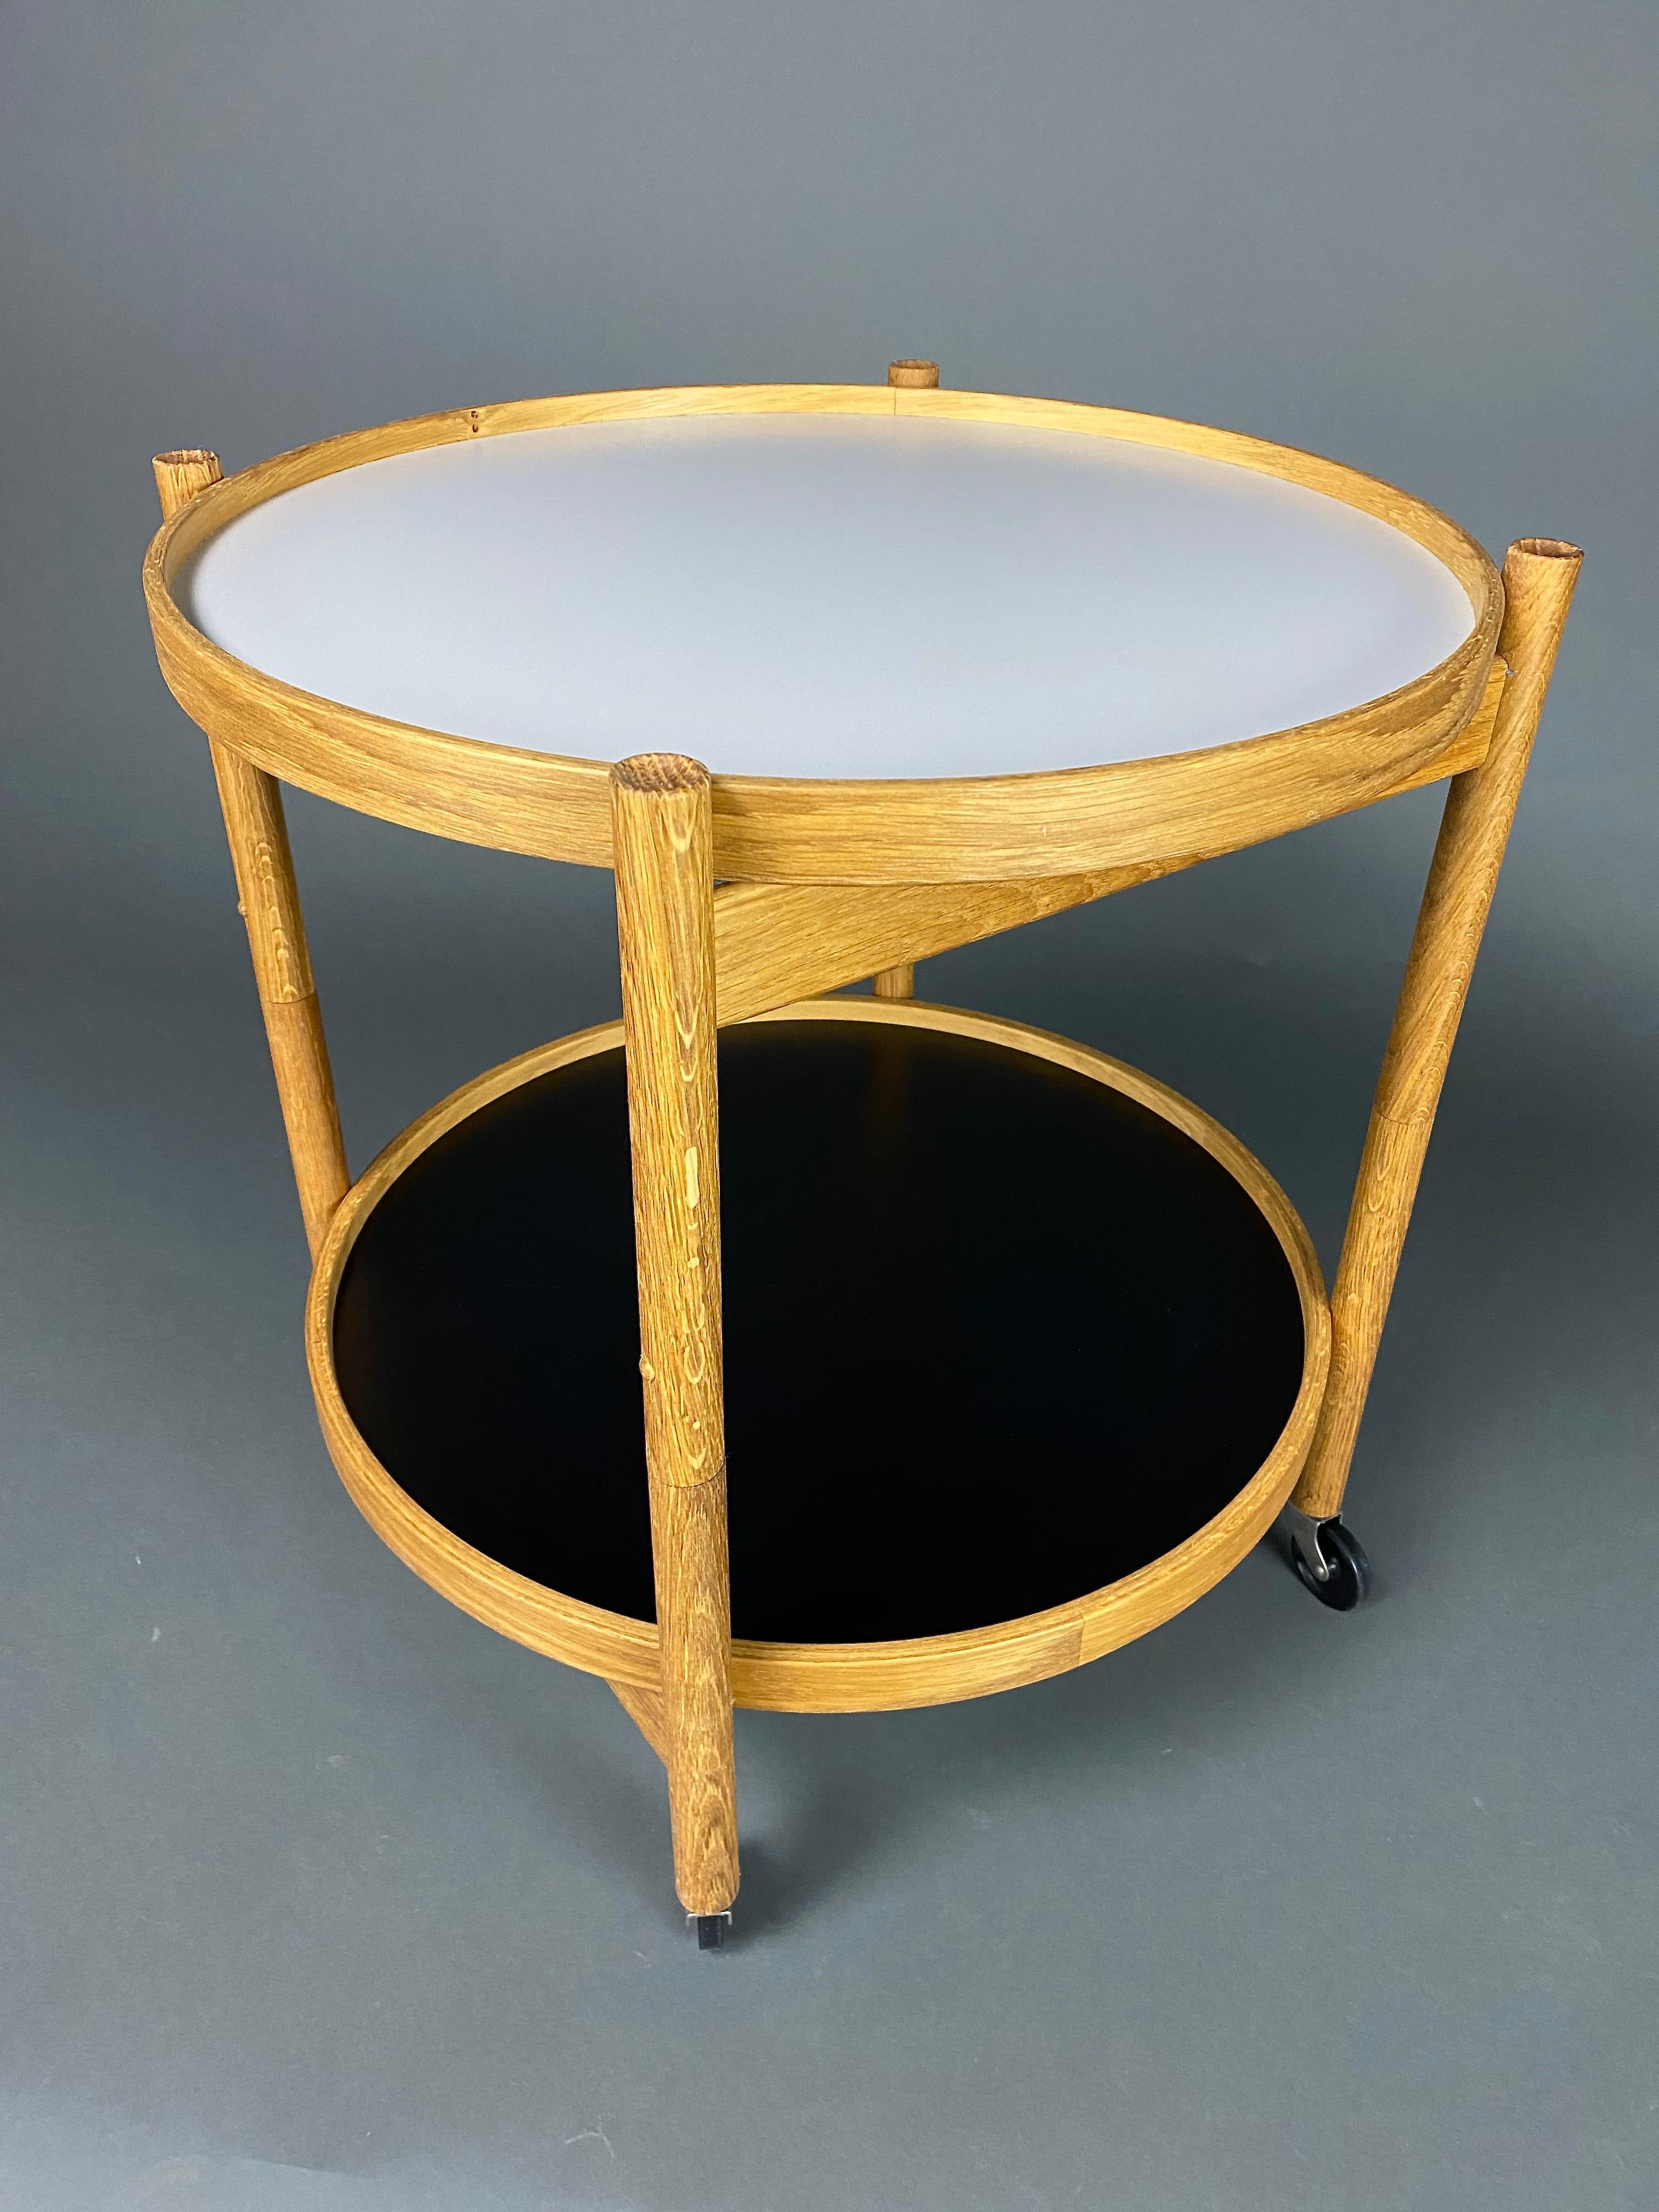 Danish Mid-Century Modern Foldable Serving Trolley In Good Condition For Sale In Weesp, NL